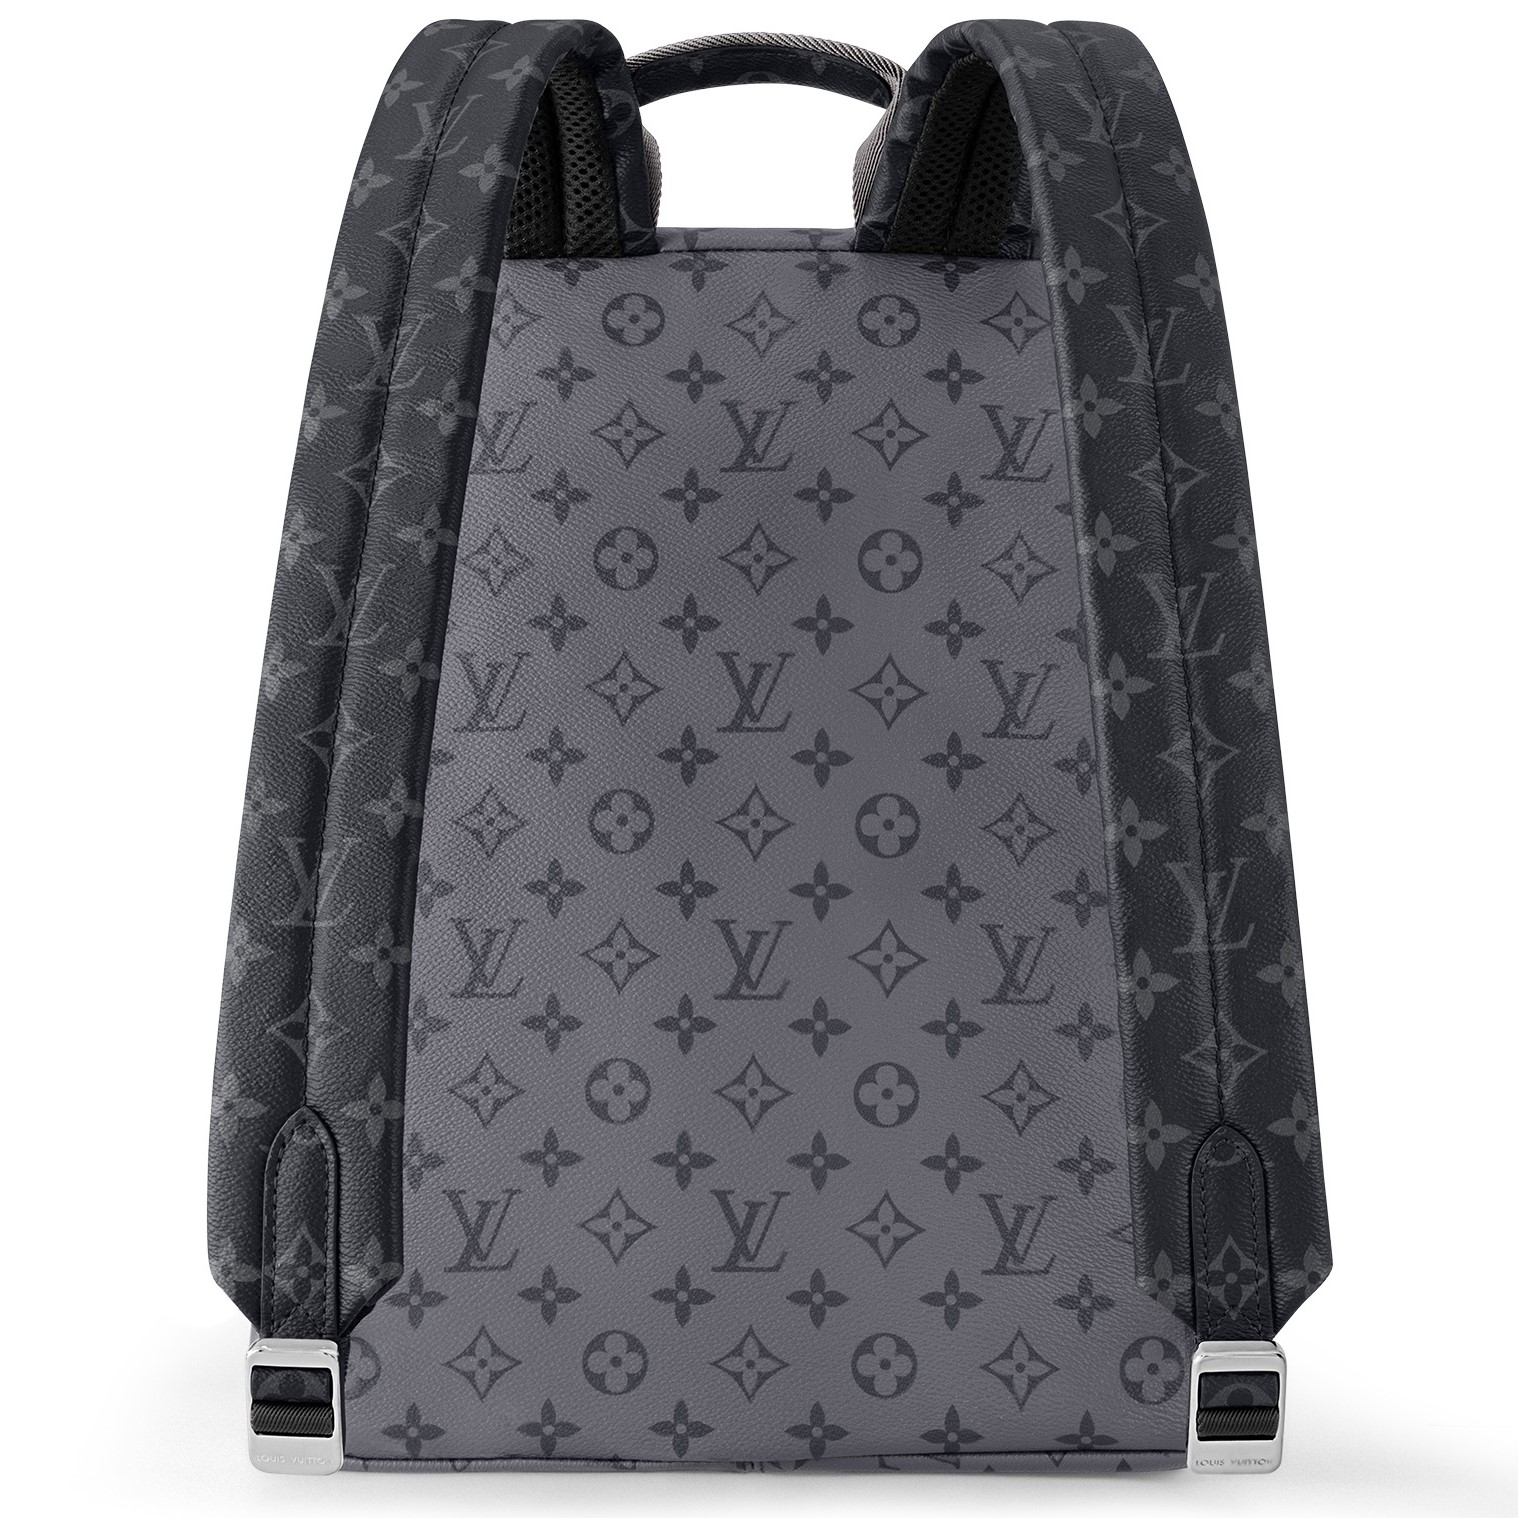 BALO NAM LOUIS VUITTON LV DISCOVERY BACKPACK MONOGRAM ECLIPSE CANVAS 6